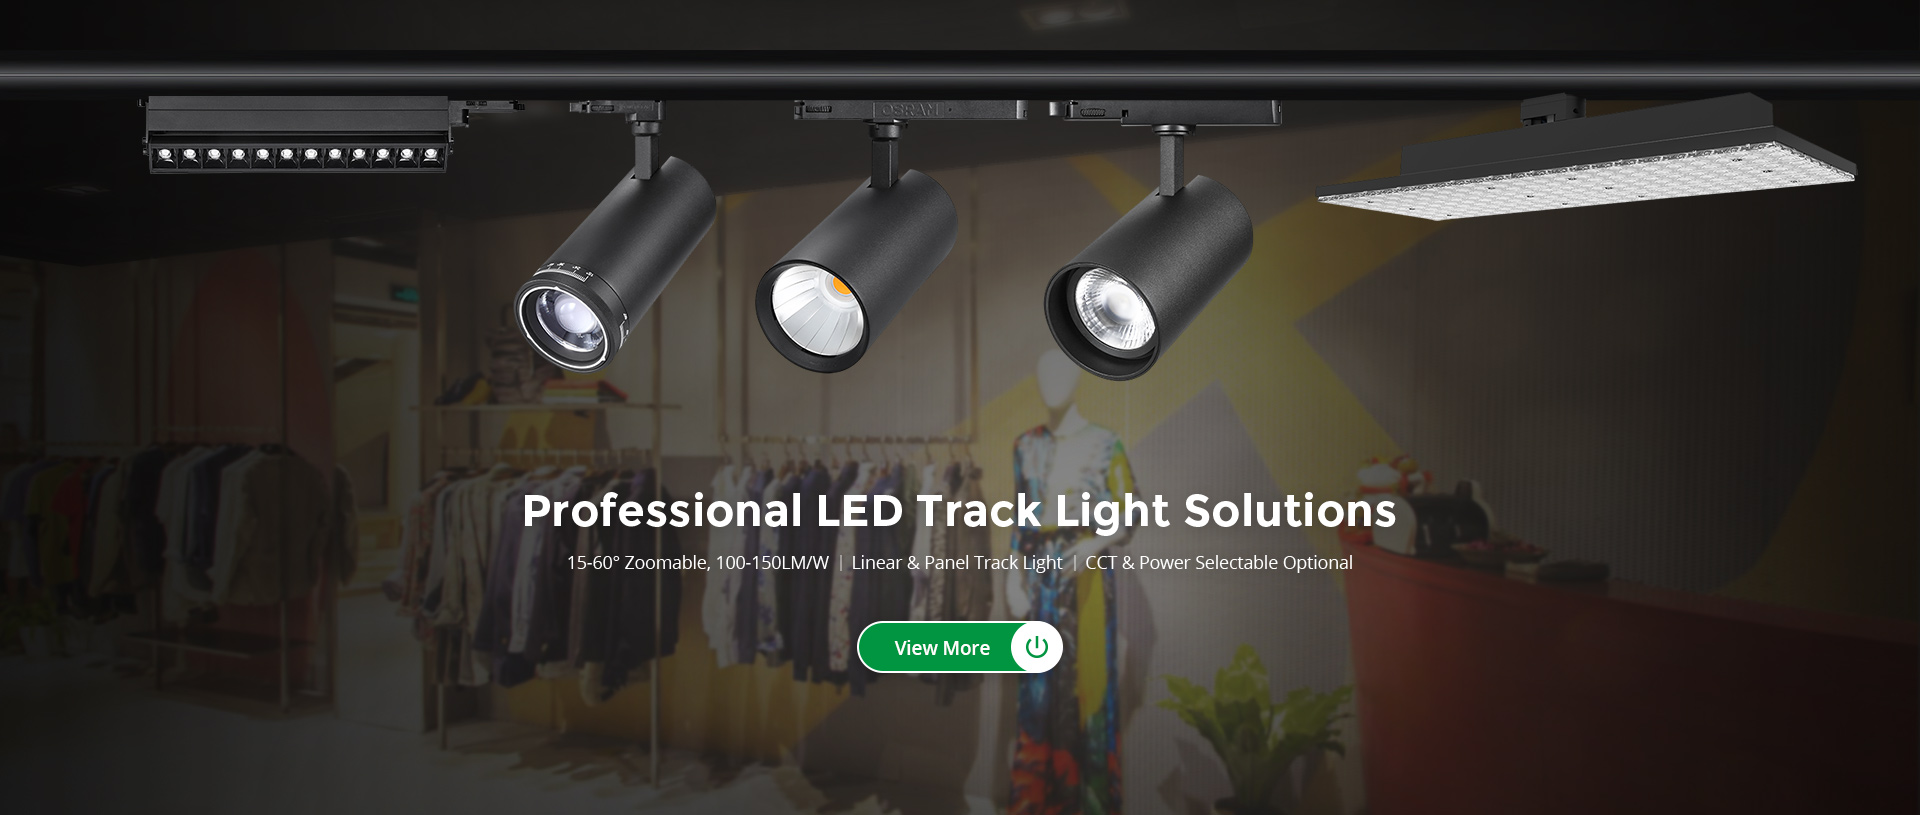 Professional LED Track Light Solutions - Dali Dimmable Zoomable LED Track Spot Light, LED Linear Track Light, LED Panel Track Light.